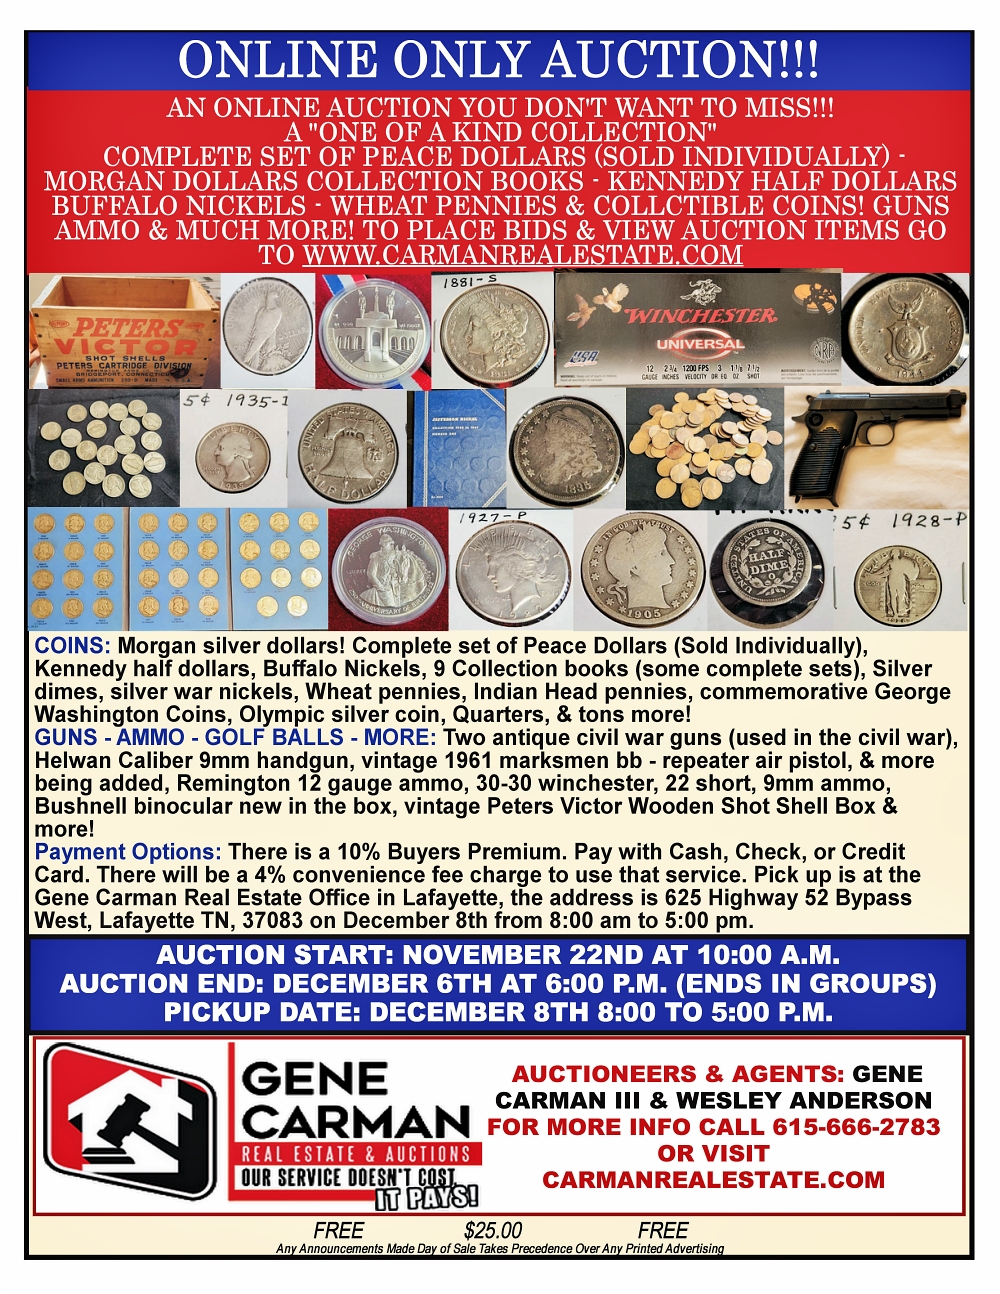 ONLINE ONLY AUCTION!!! COINS - GUNS - AMMO & MORE!